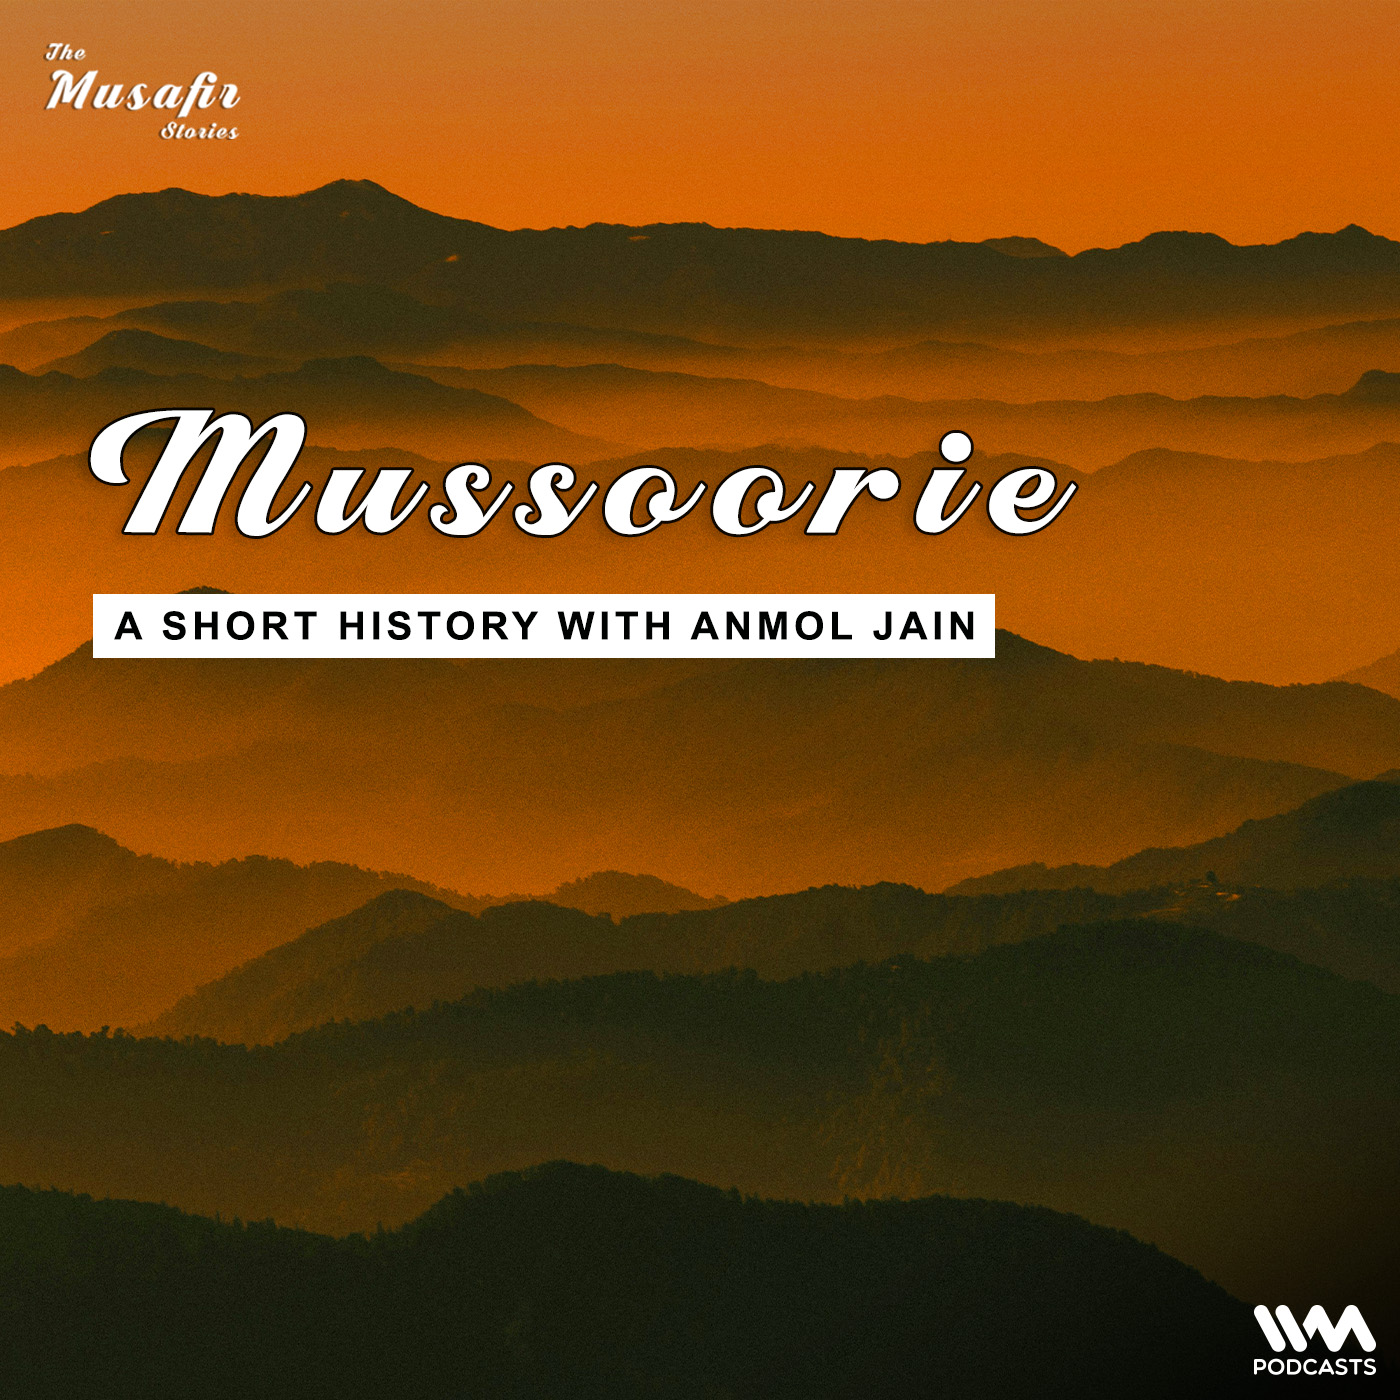 Mussoorie - A short history with Anmol Jain